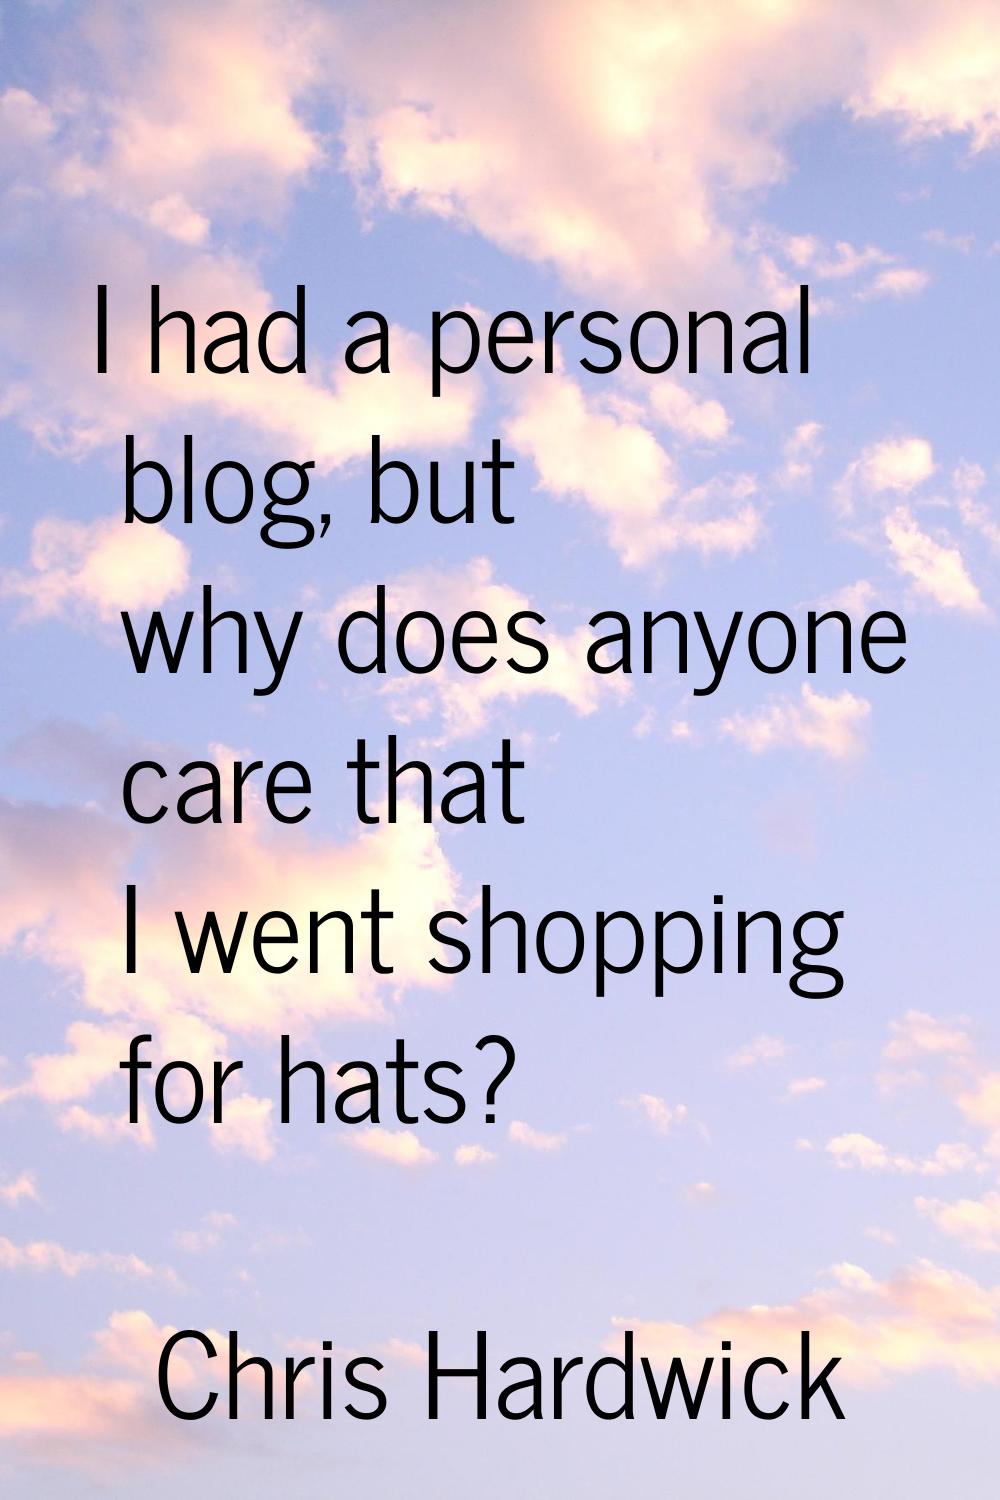 I had a personal blog, but why does anyone care that I went shopping for hats?